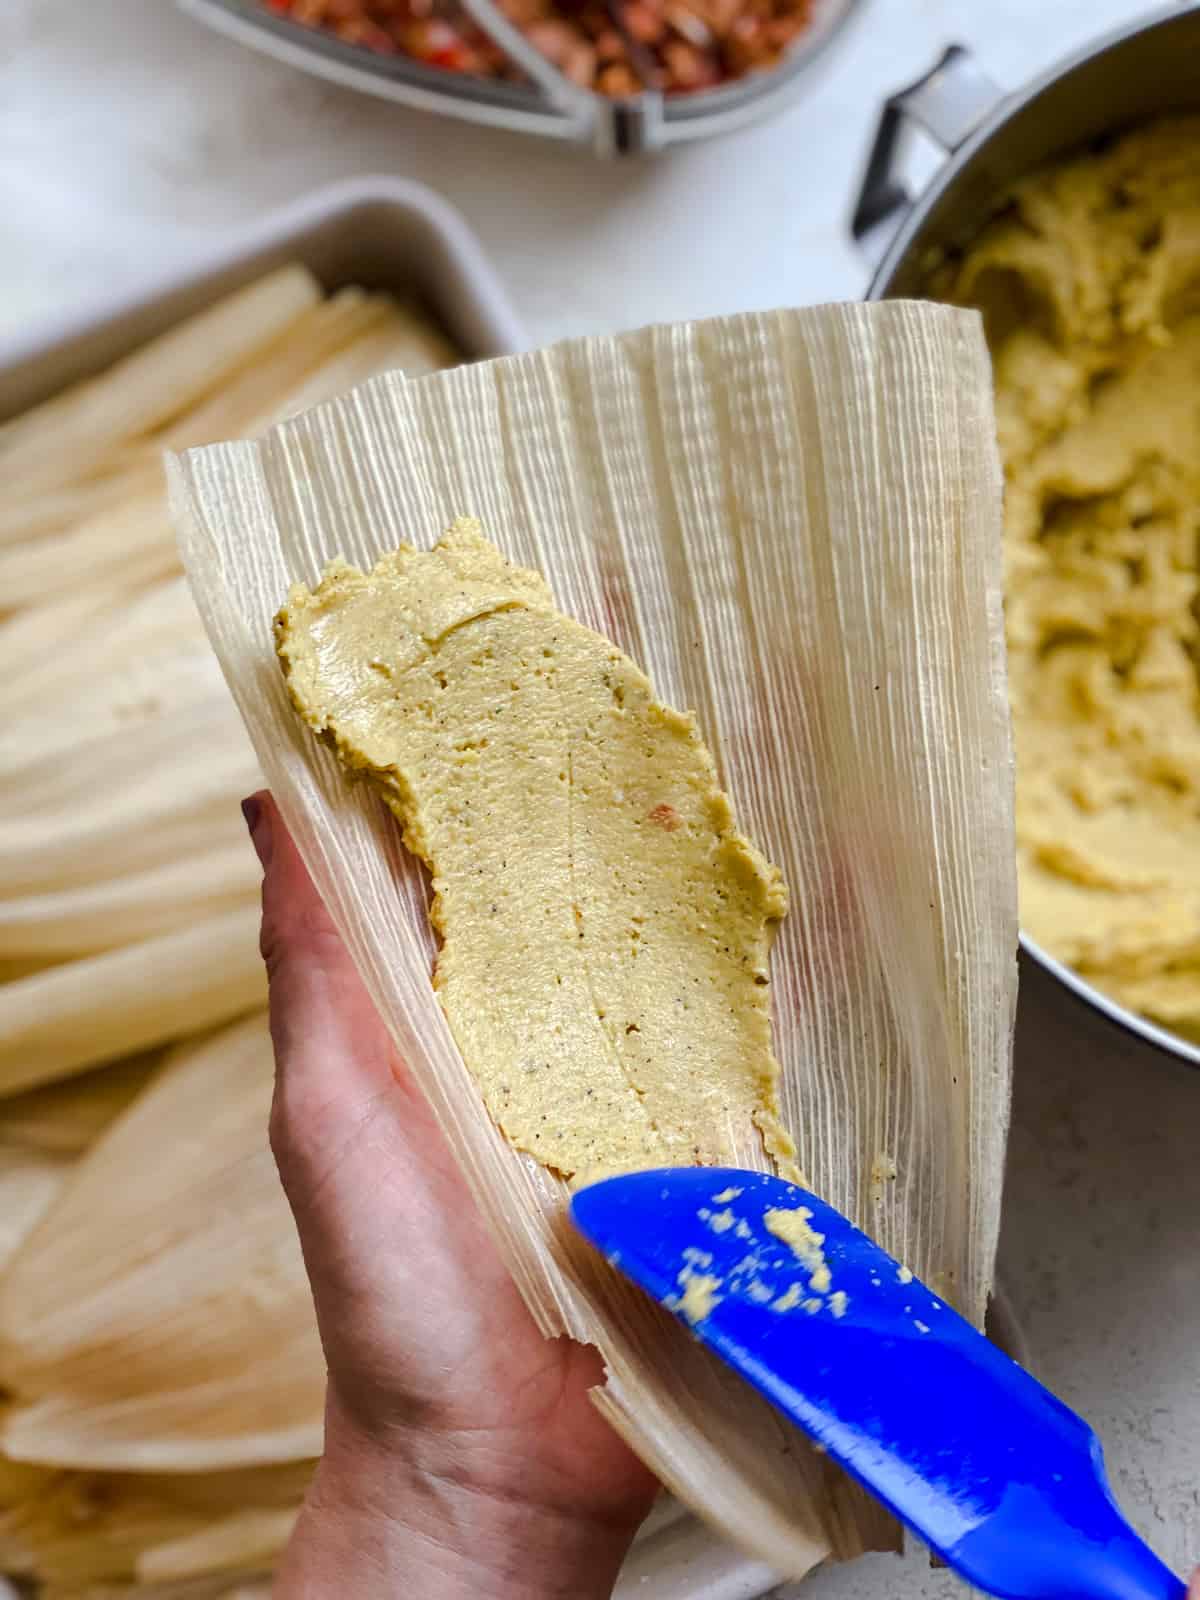 process s،t of spreading tamales filling mixture into corn husk